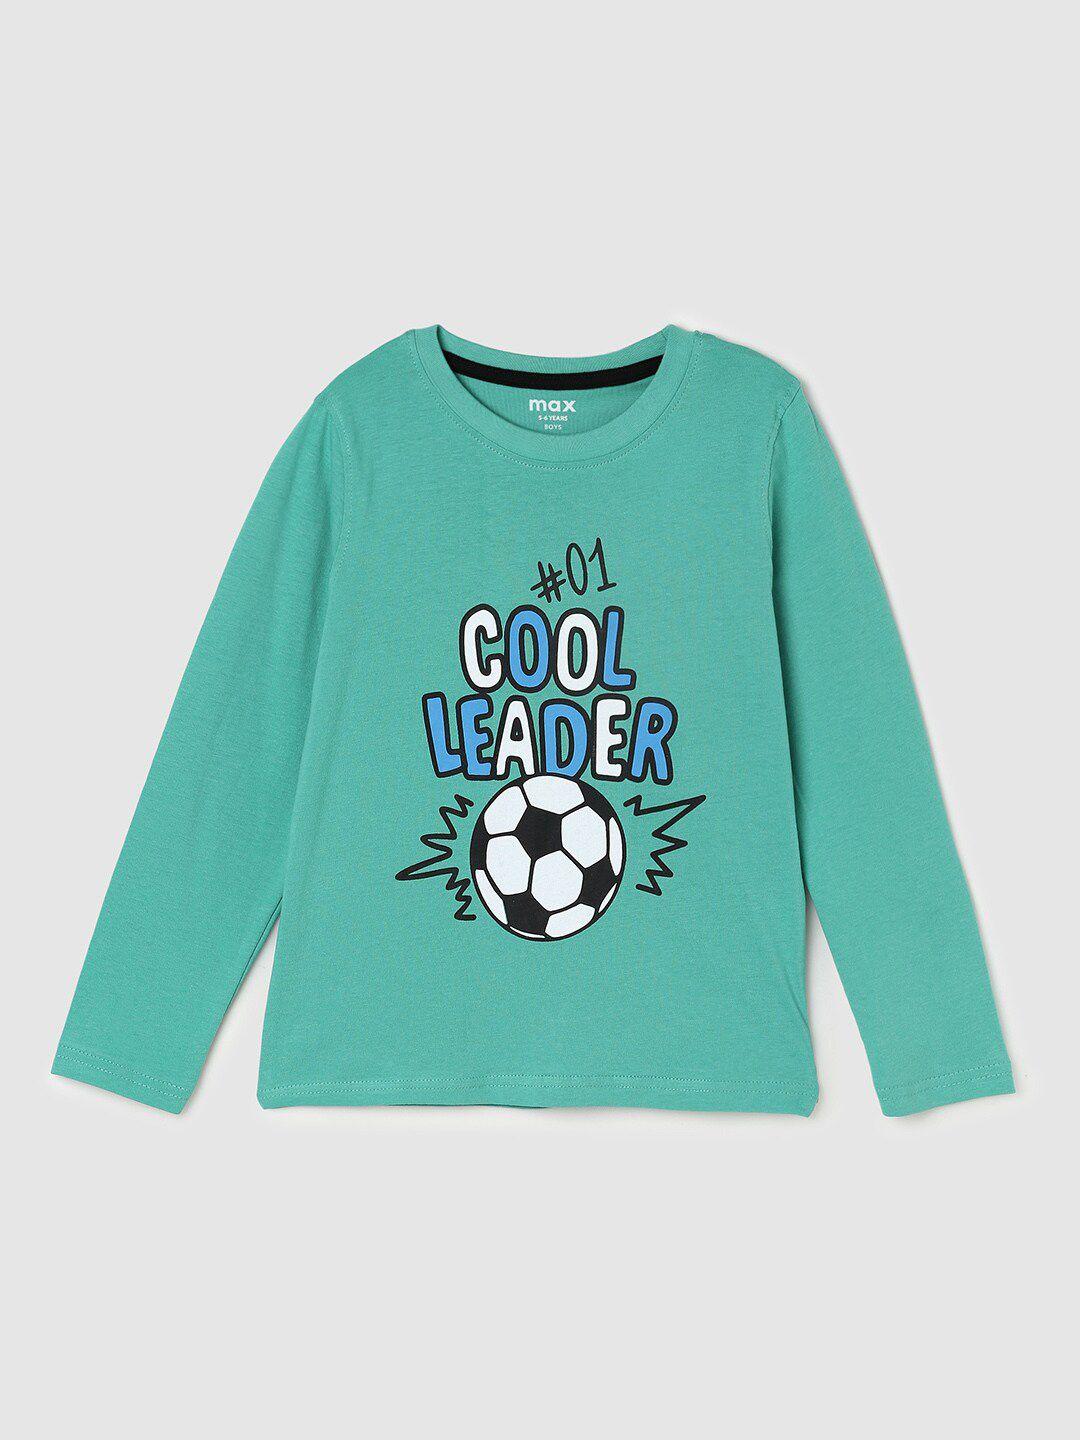 max-boys-green-typography-printed-applique-cotton-t-shirt